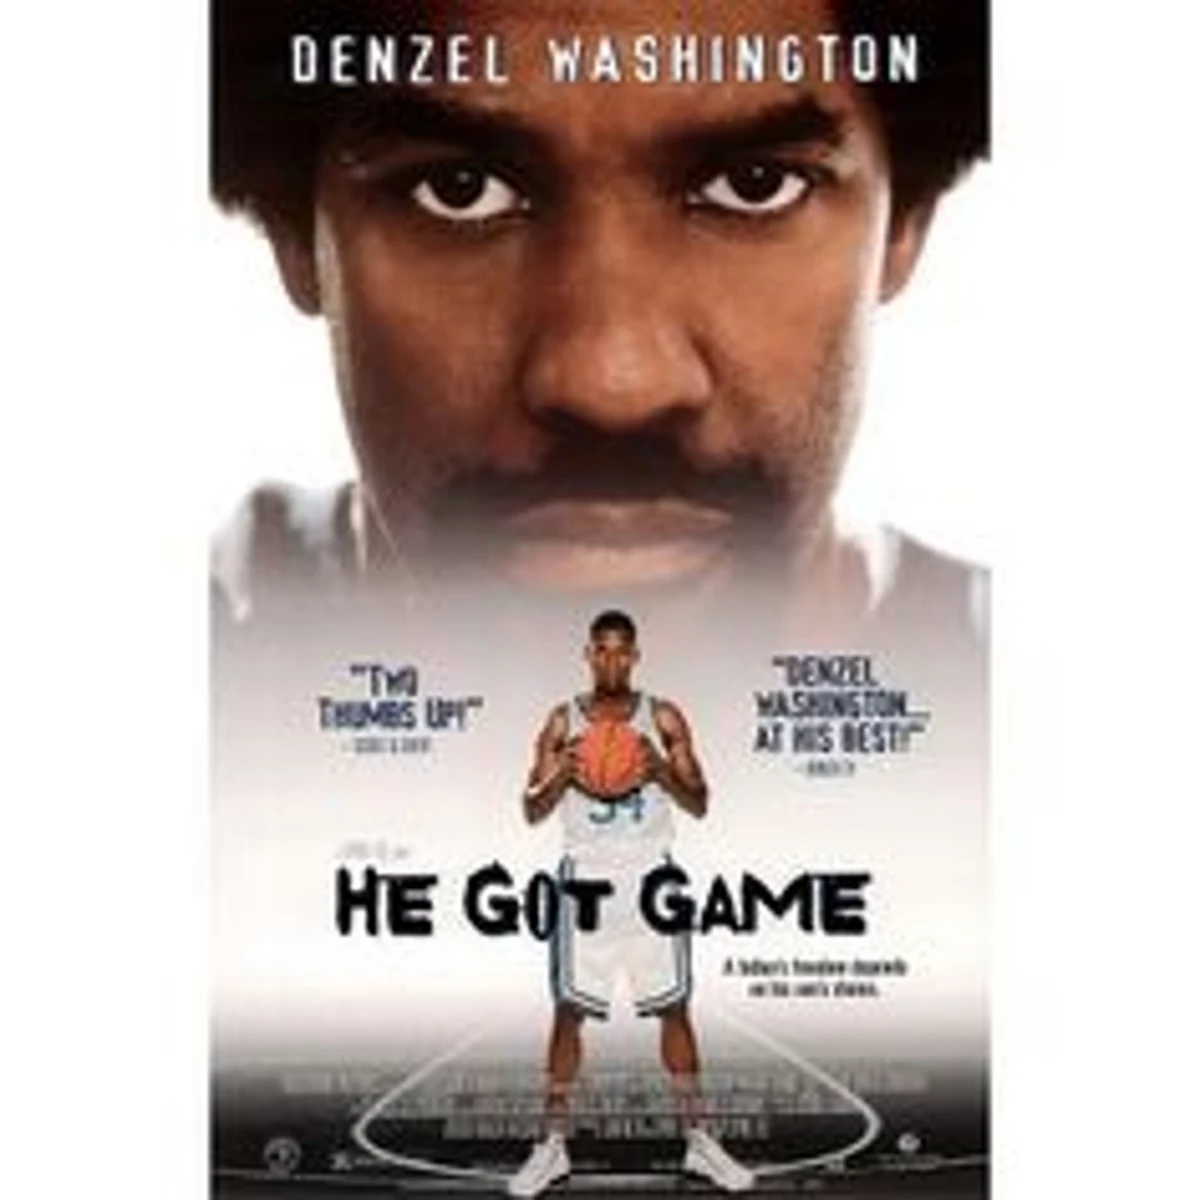 Ray Allen shares how he got the role for the movie 'He Got Game